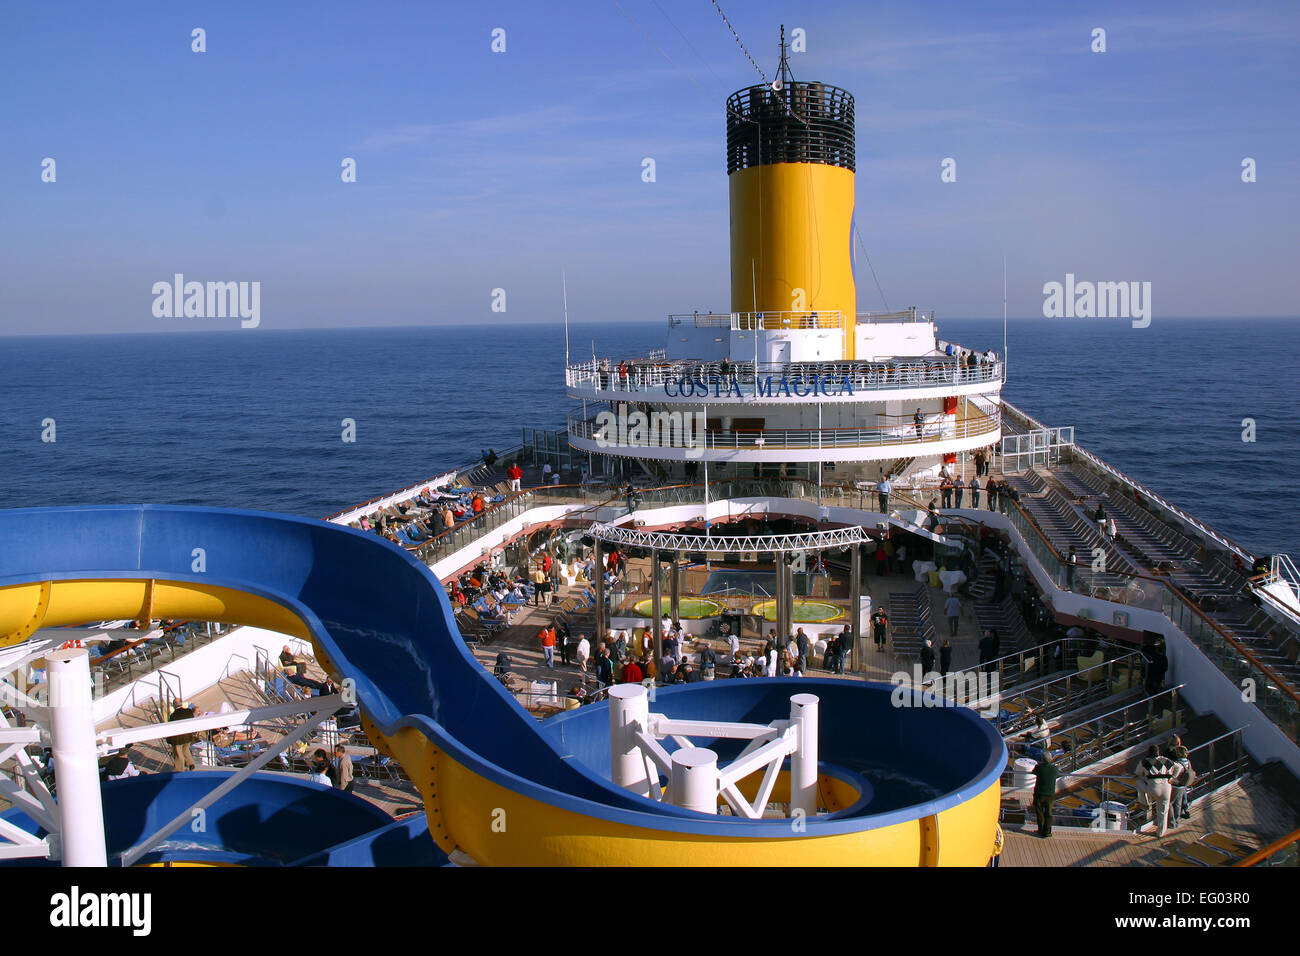 Passengers enjoy a sunny day on the deck cruise ship Costa Magica, while  sailing the Mediterranean Sea on November 11, 2007 Stock Photo - Alamy